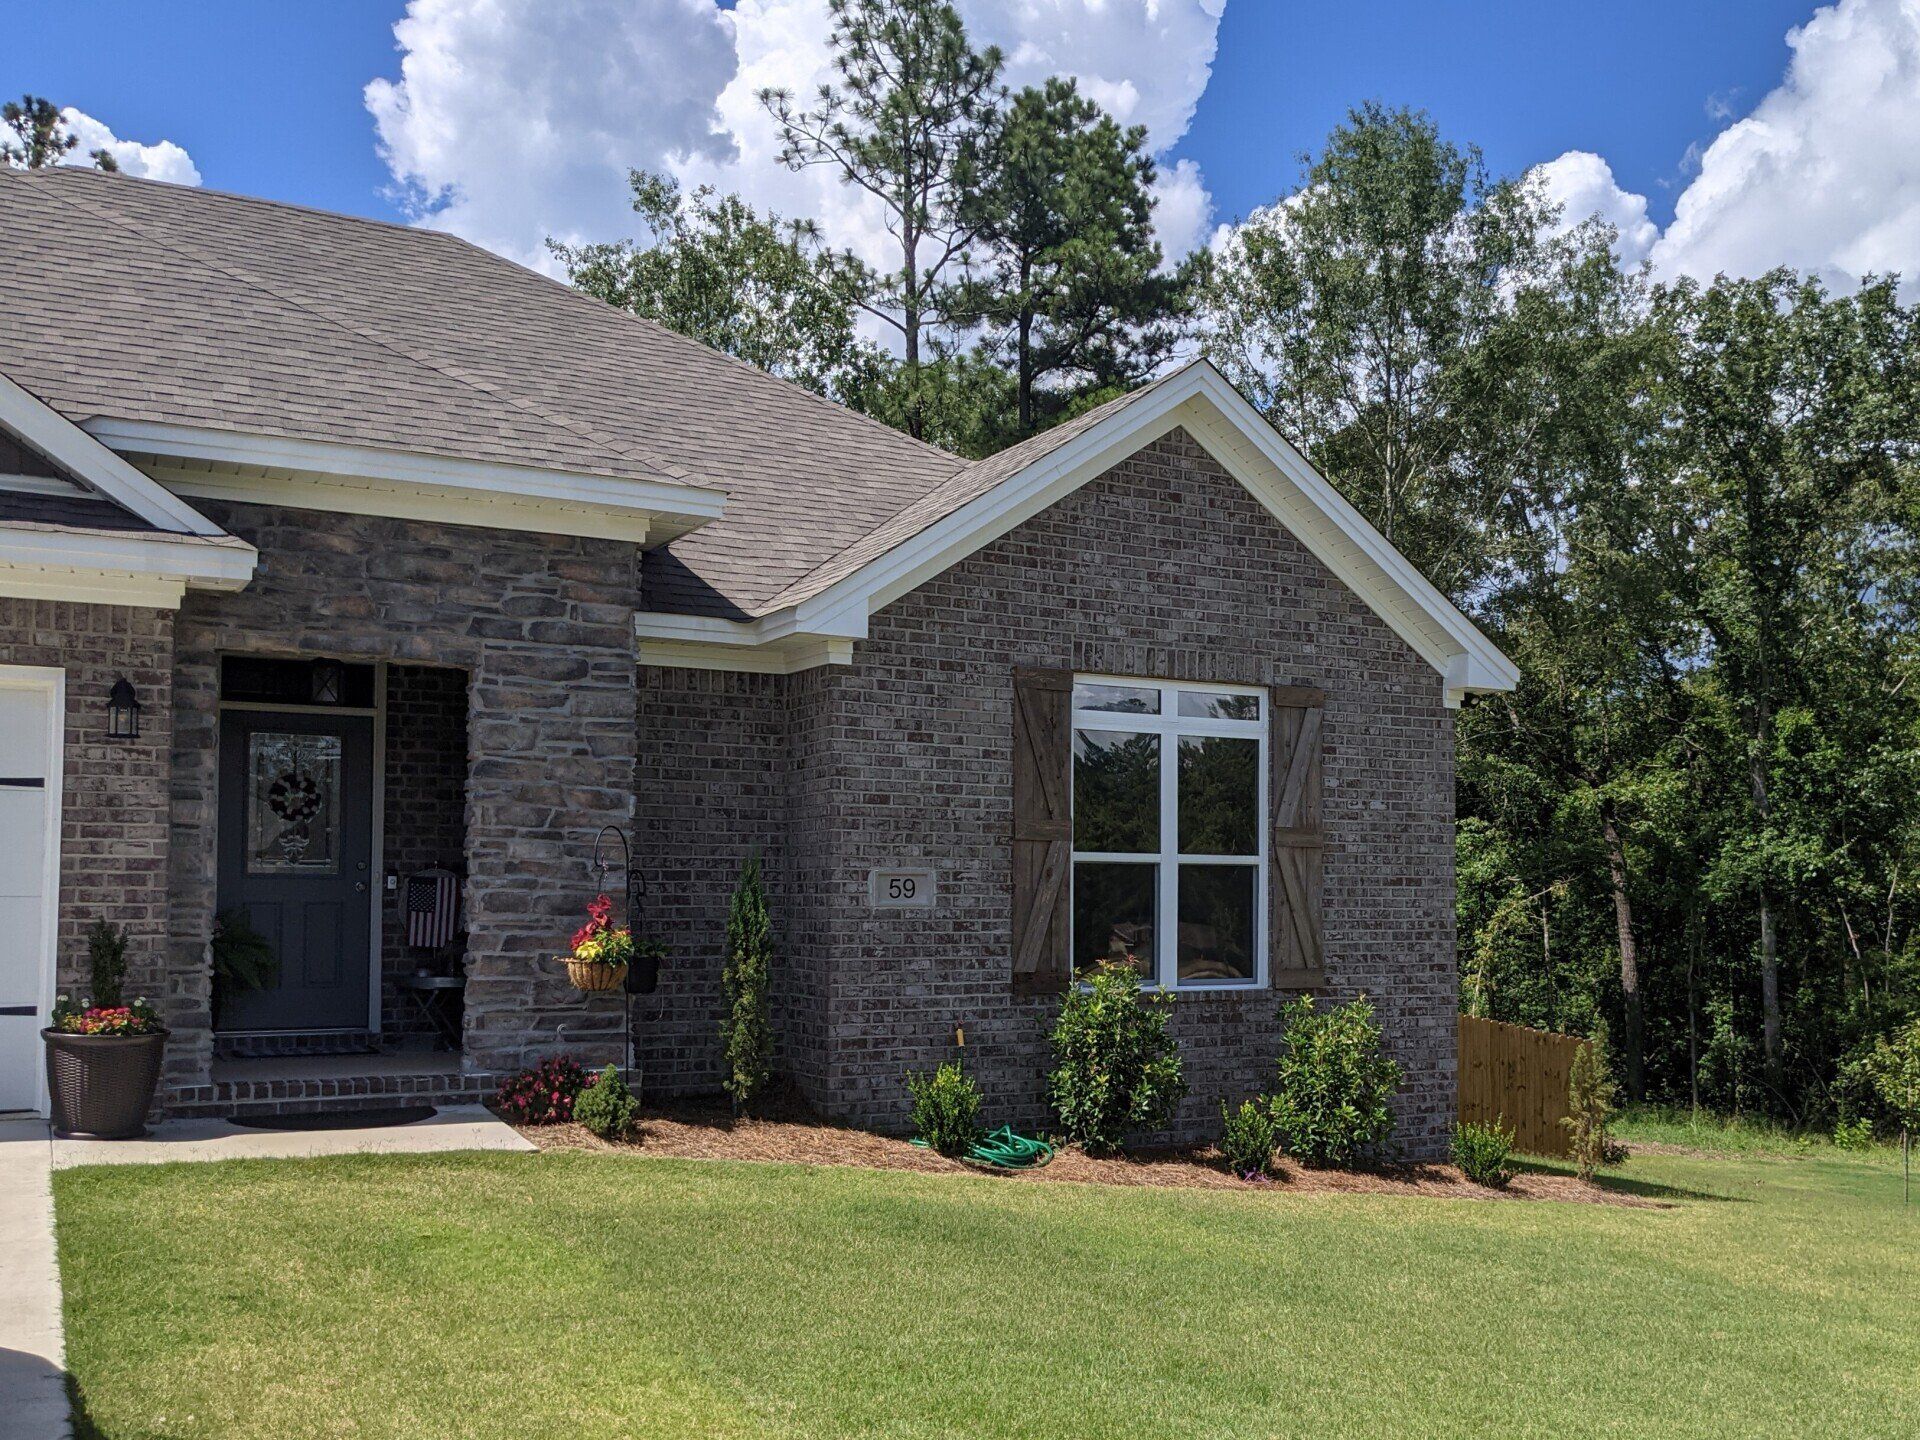 home tint Wetumpka AL - Bright Glare blocked Along with 85% Heat Gain after SPF Performance Rose Gold residential tint in Wetumpka, AL